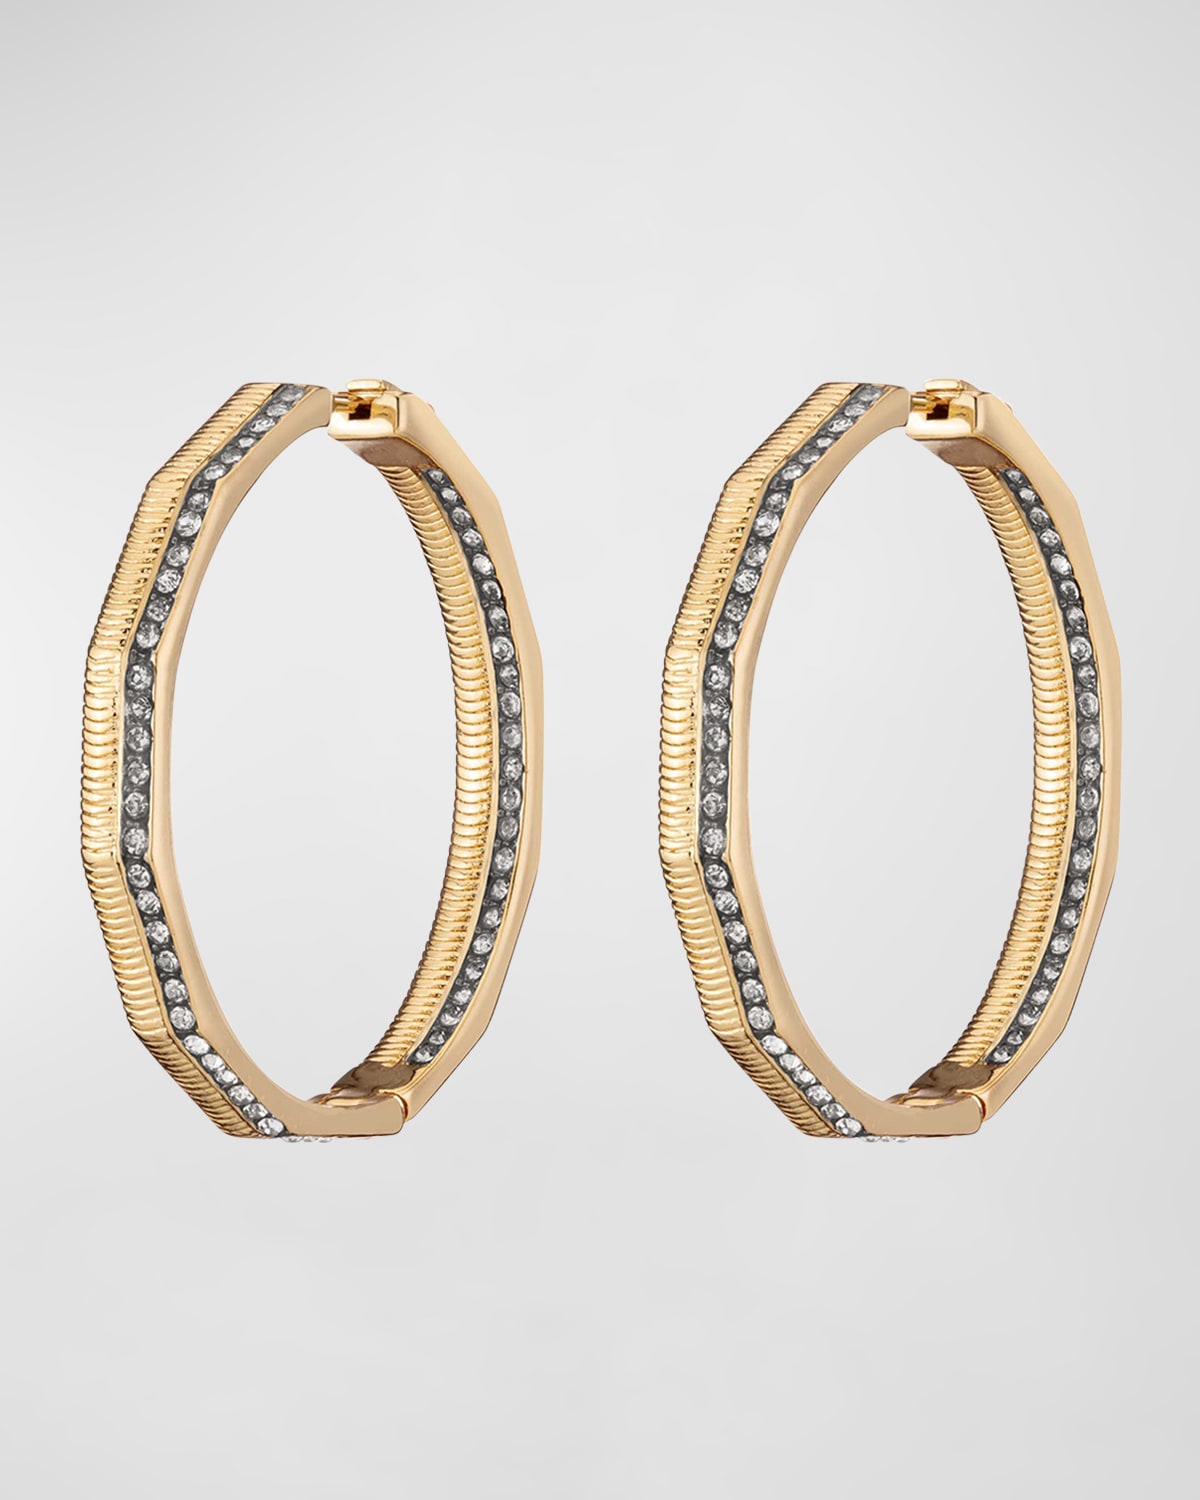 DEMARSON 14K GOLD-PLATED HOOP EARRINGS WITH CRYSTALS